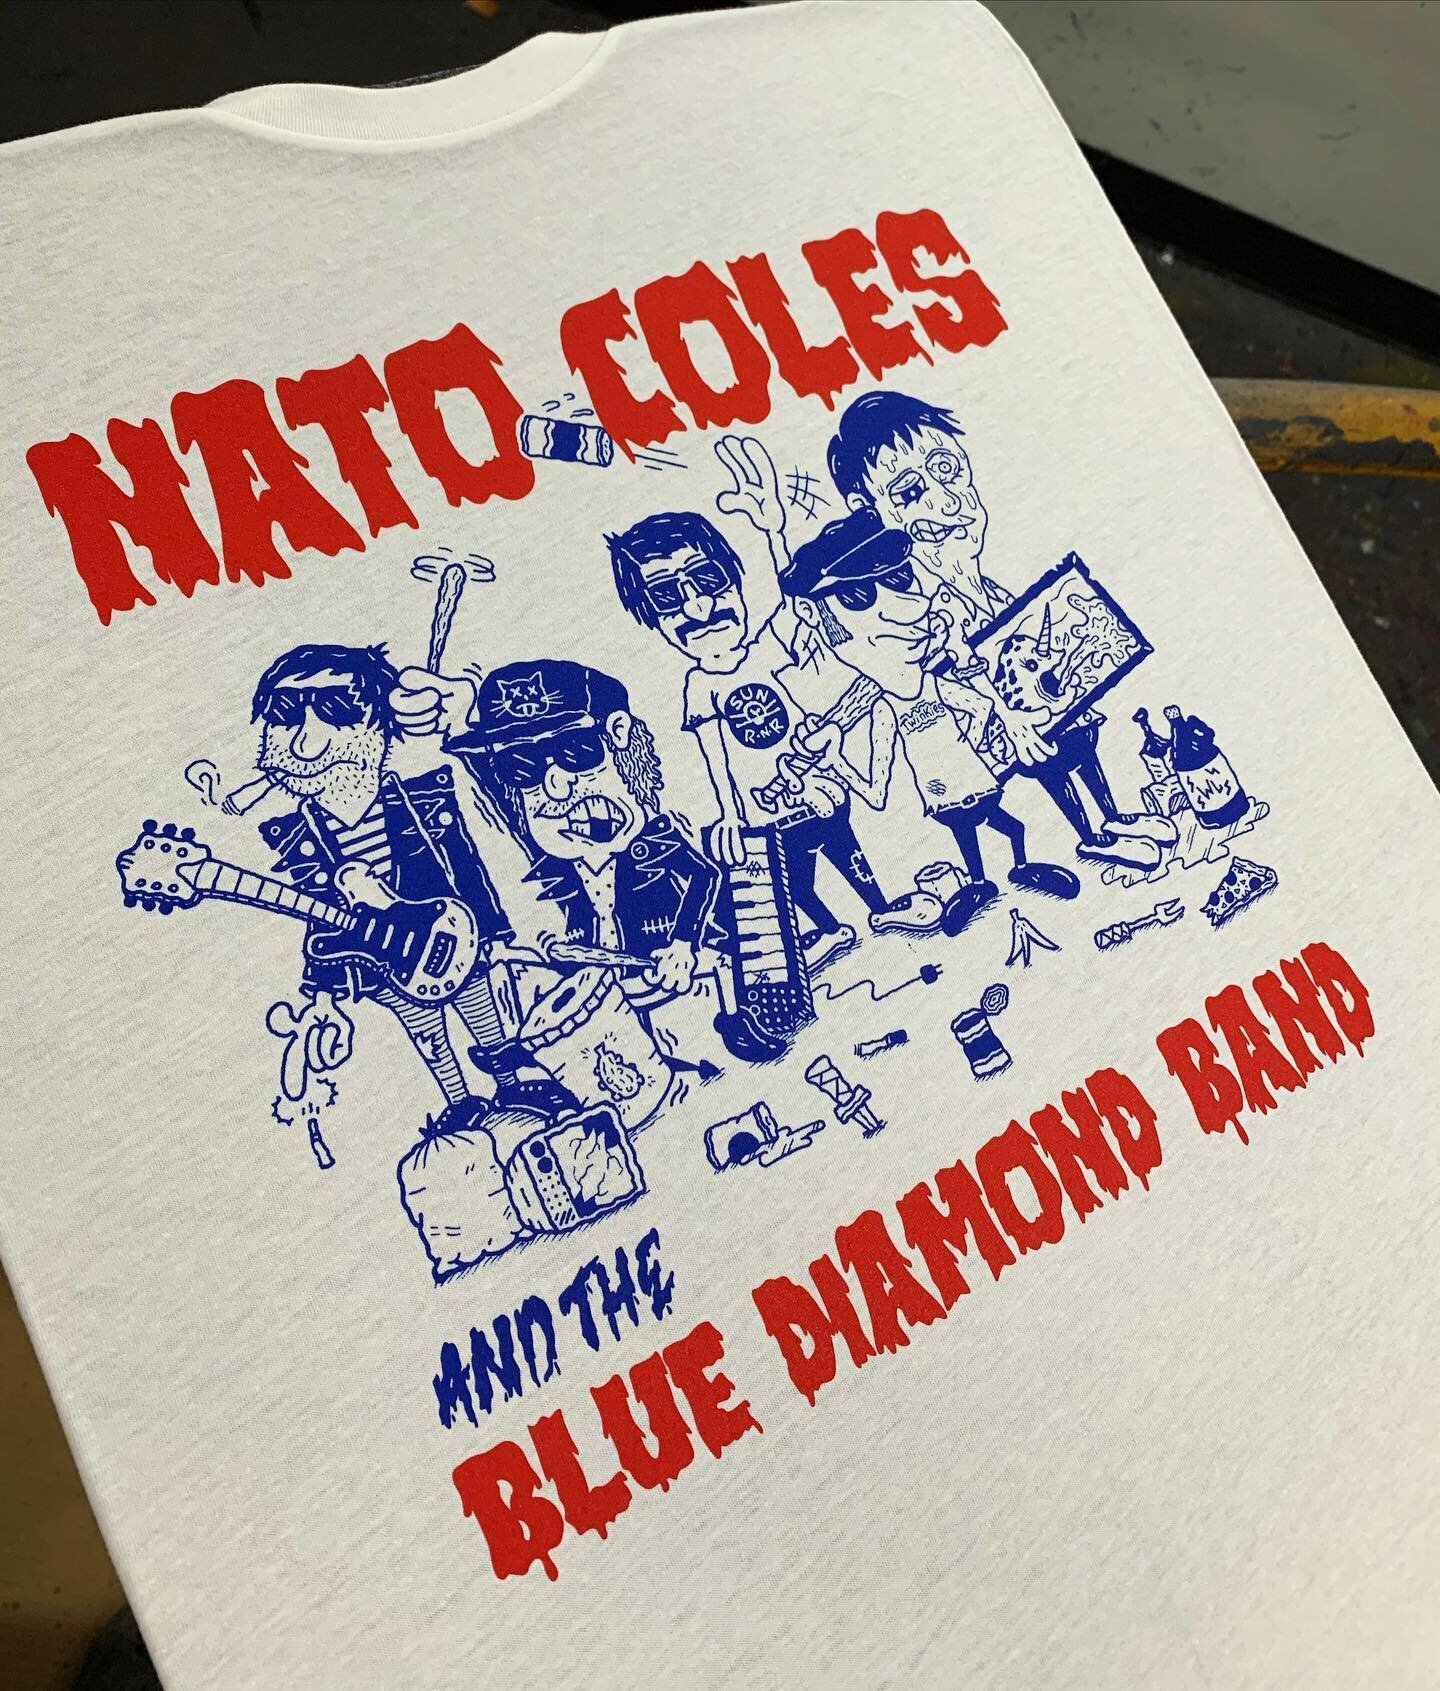 Scrolling through my photos trying to find an old design. Stumbled across this gem, how did we not post this?
Anyways super fun design (not sure who did it?) we printed for @natocoles and the Blue Diamond band.
.
.
.
.
#natocolesandthebluediamondband